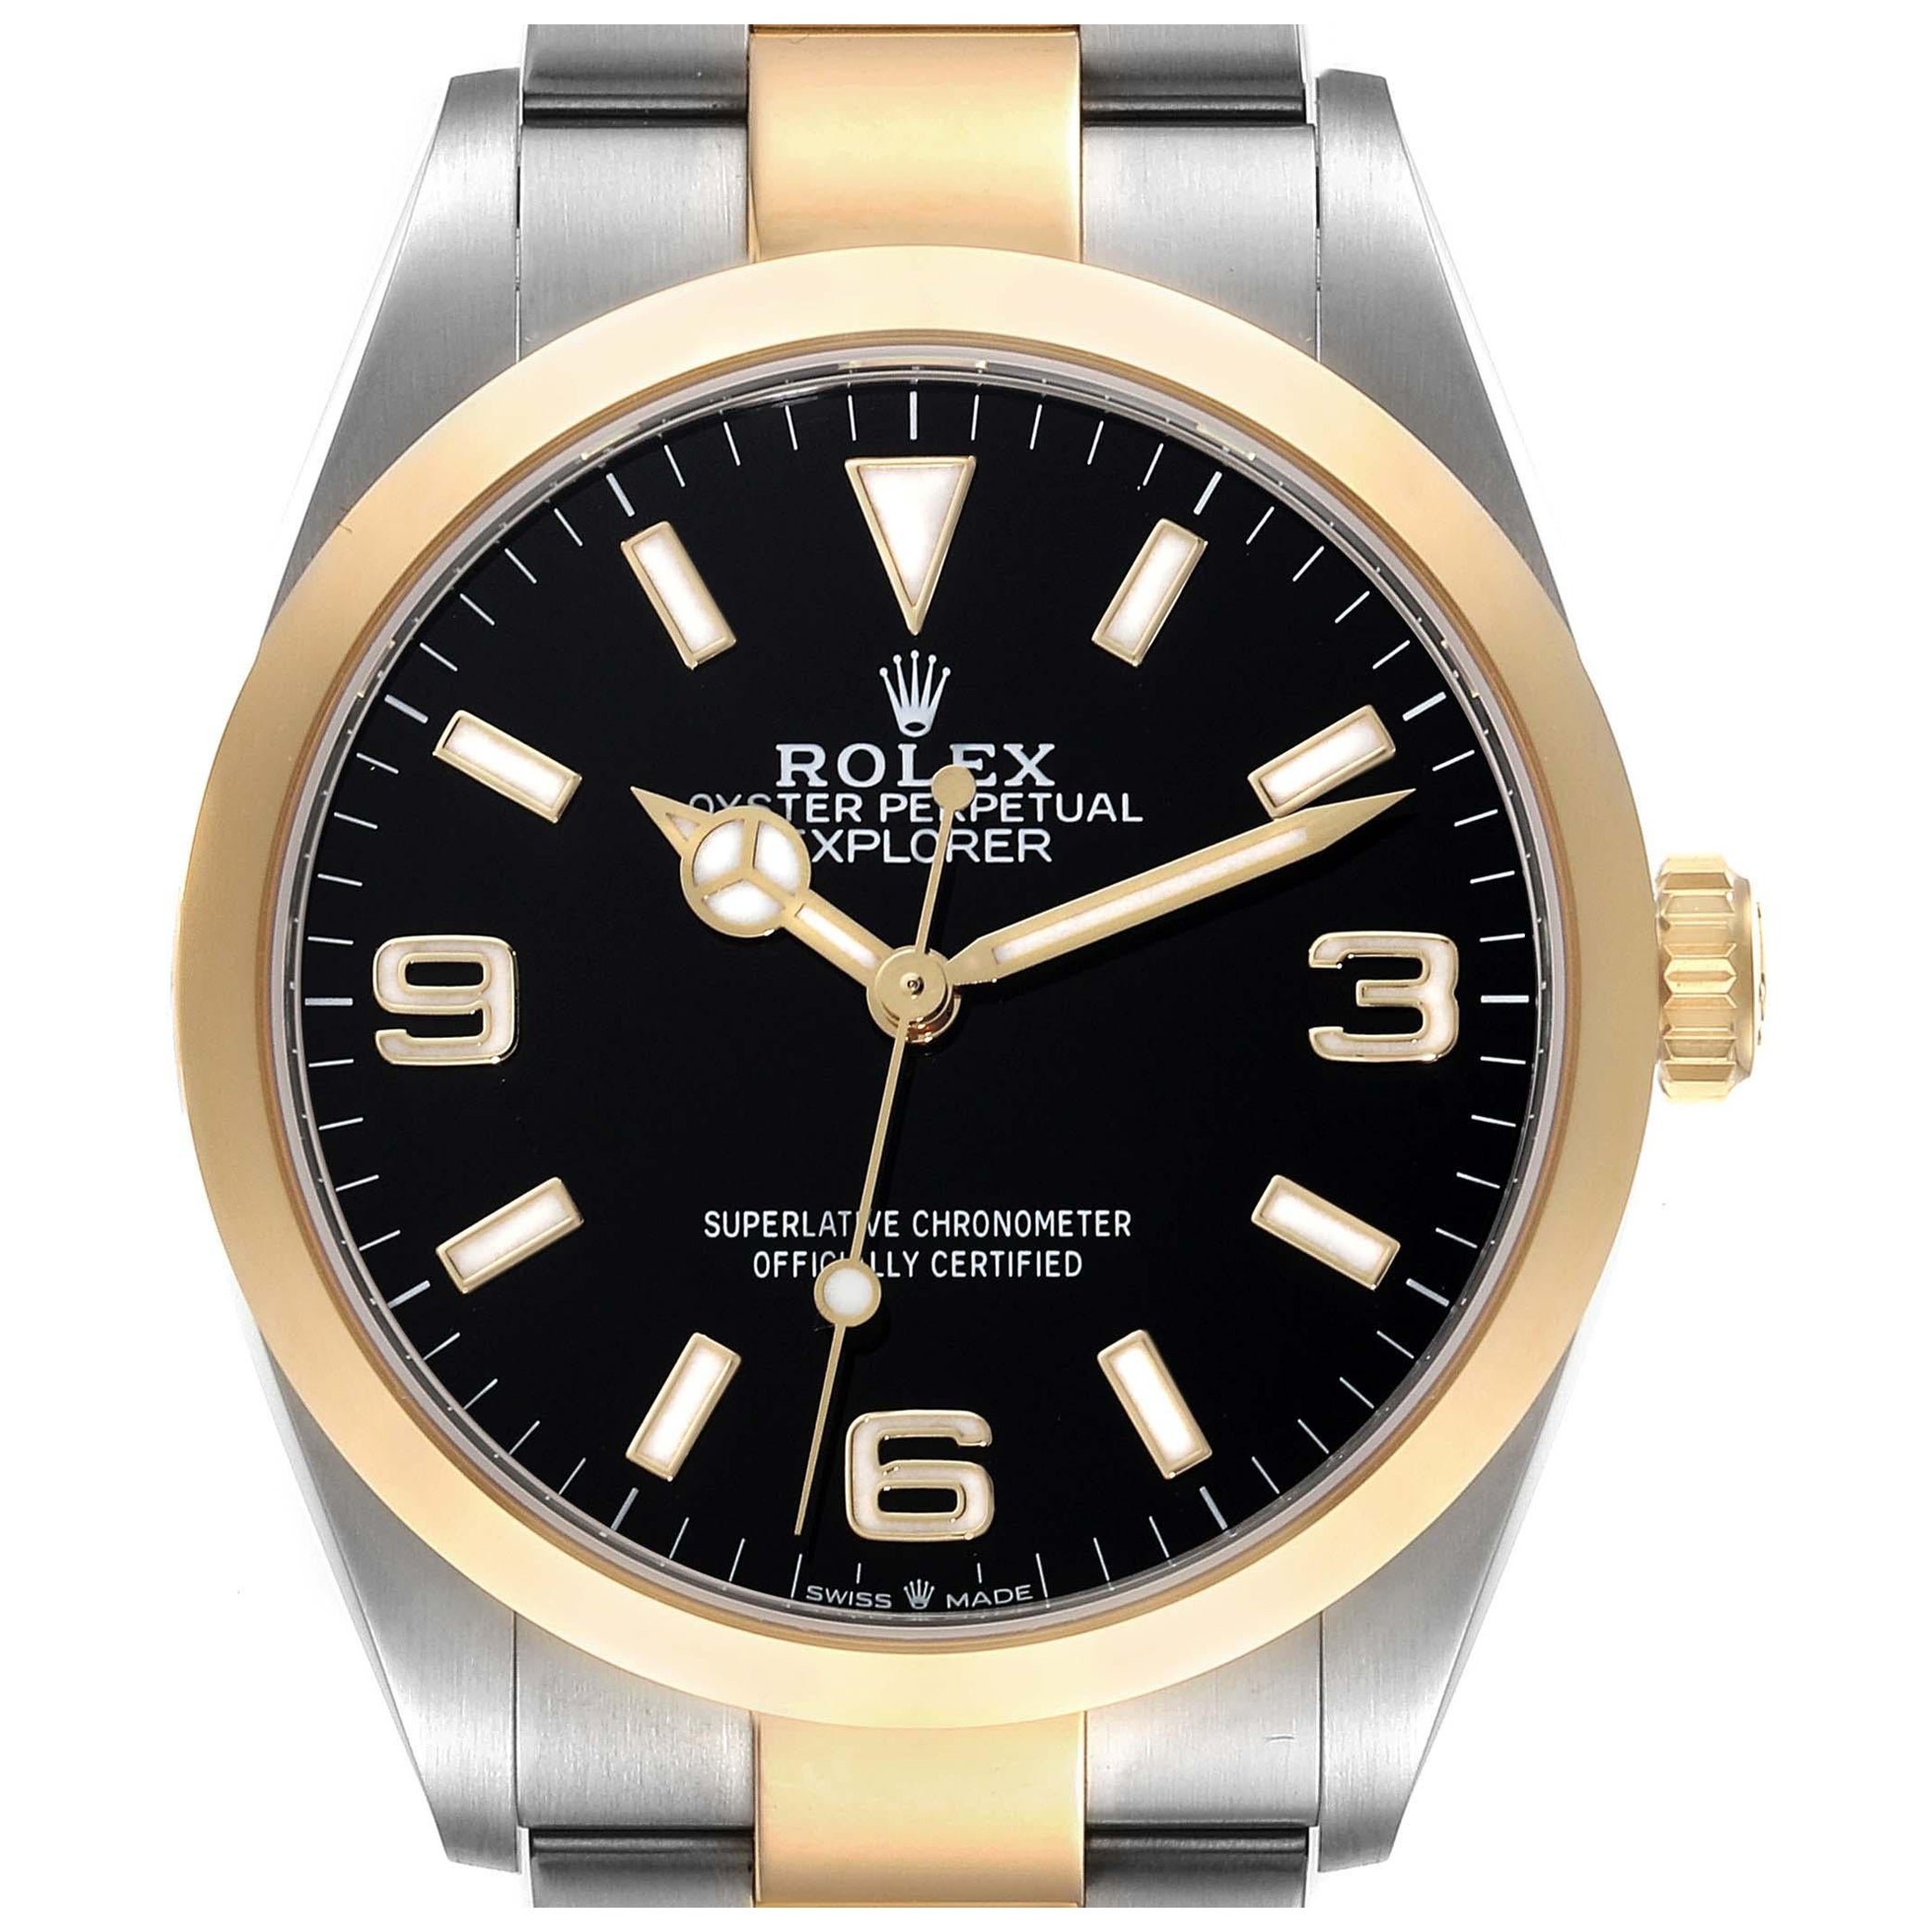 Rolex Explorer I Steel Yellow Gold Black Dial Mens Watch 124273 Box Card For Sale